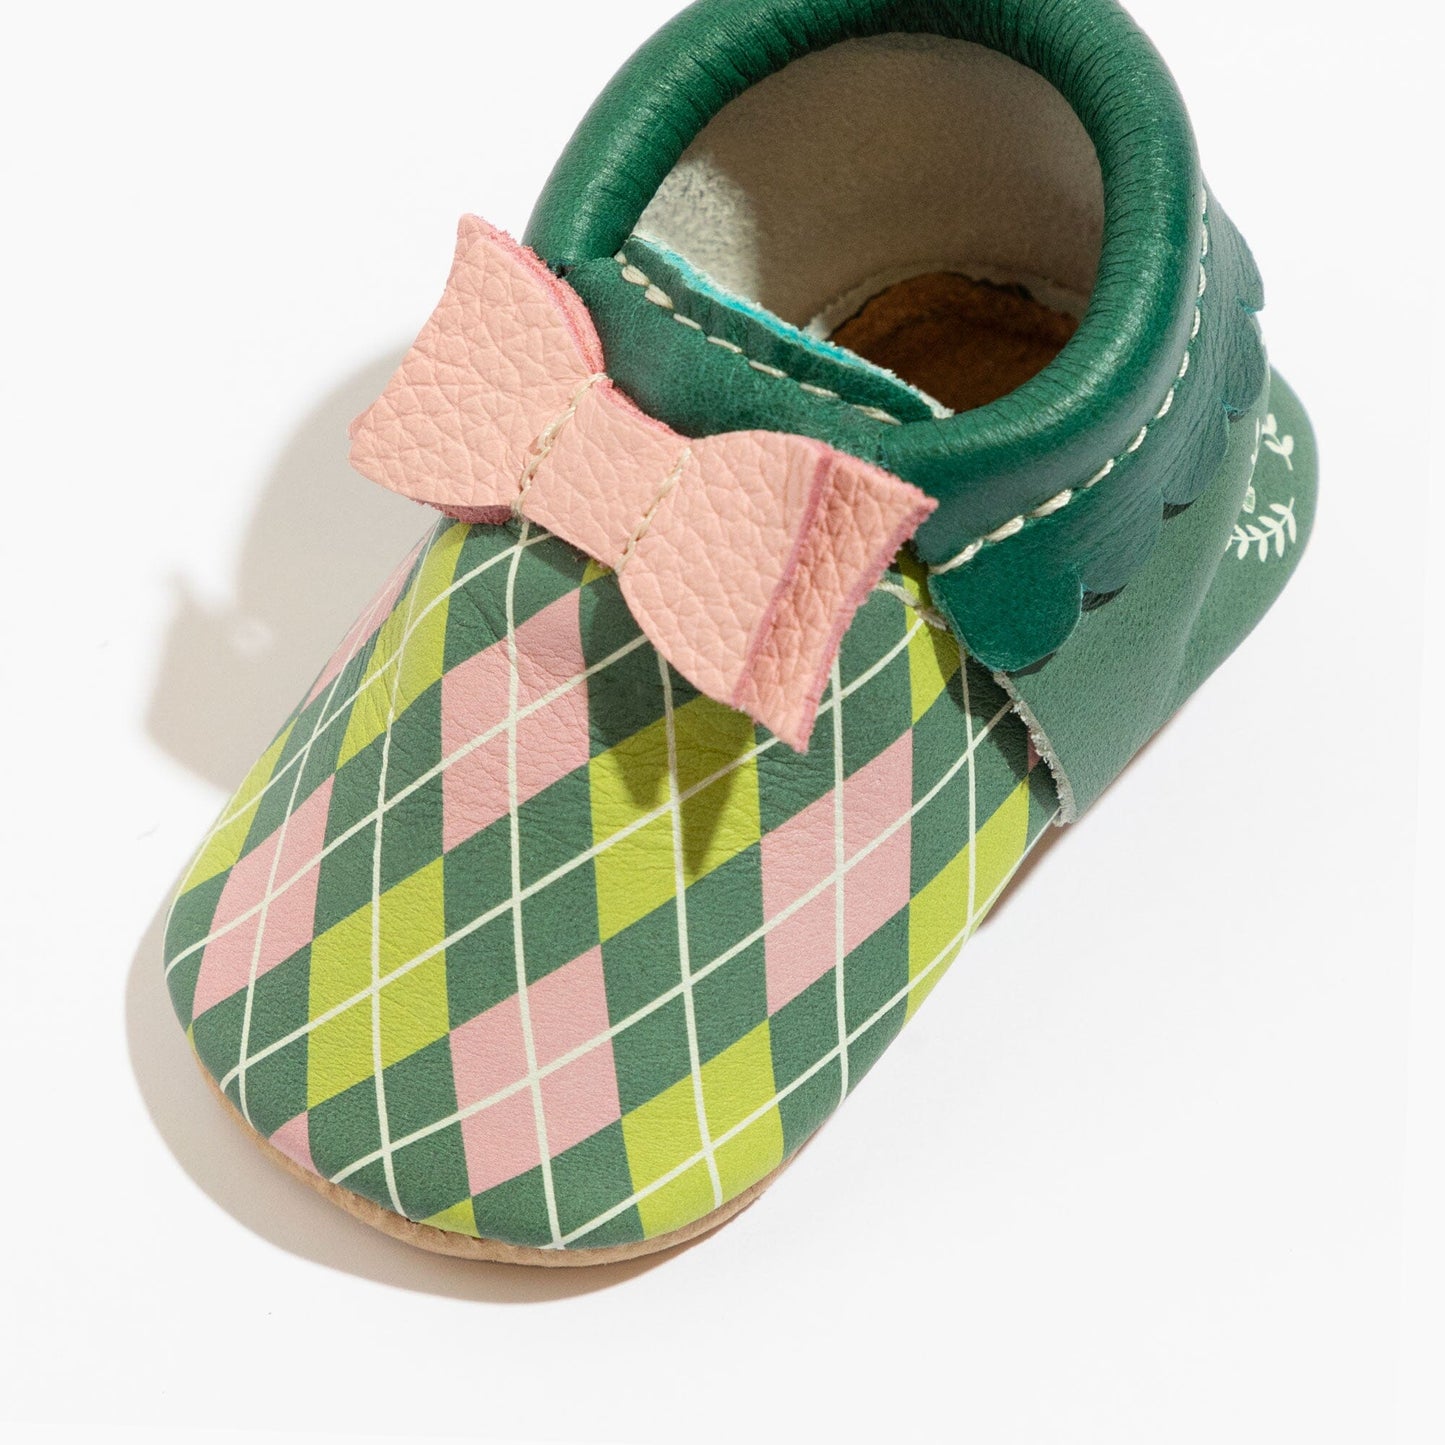 Tournament Bow Baby Shoe Bow Mocc Soft Sole 